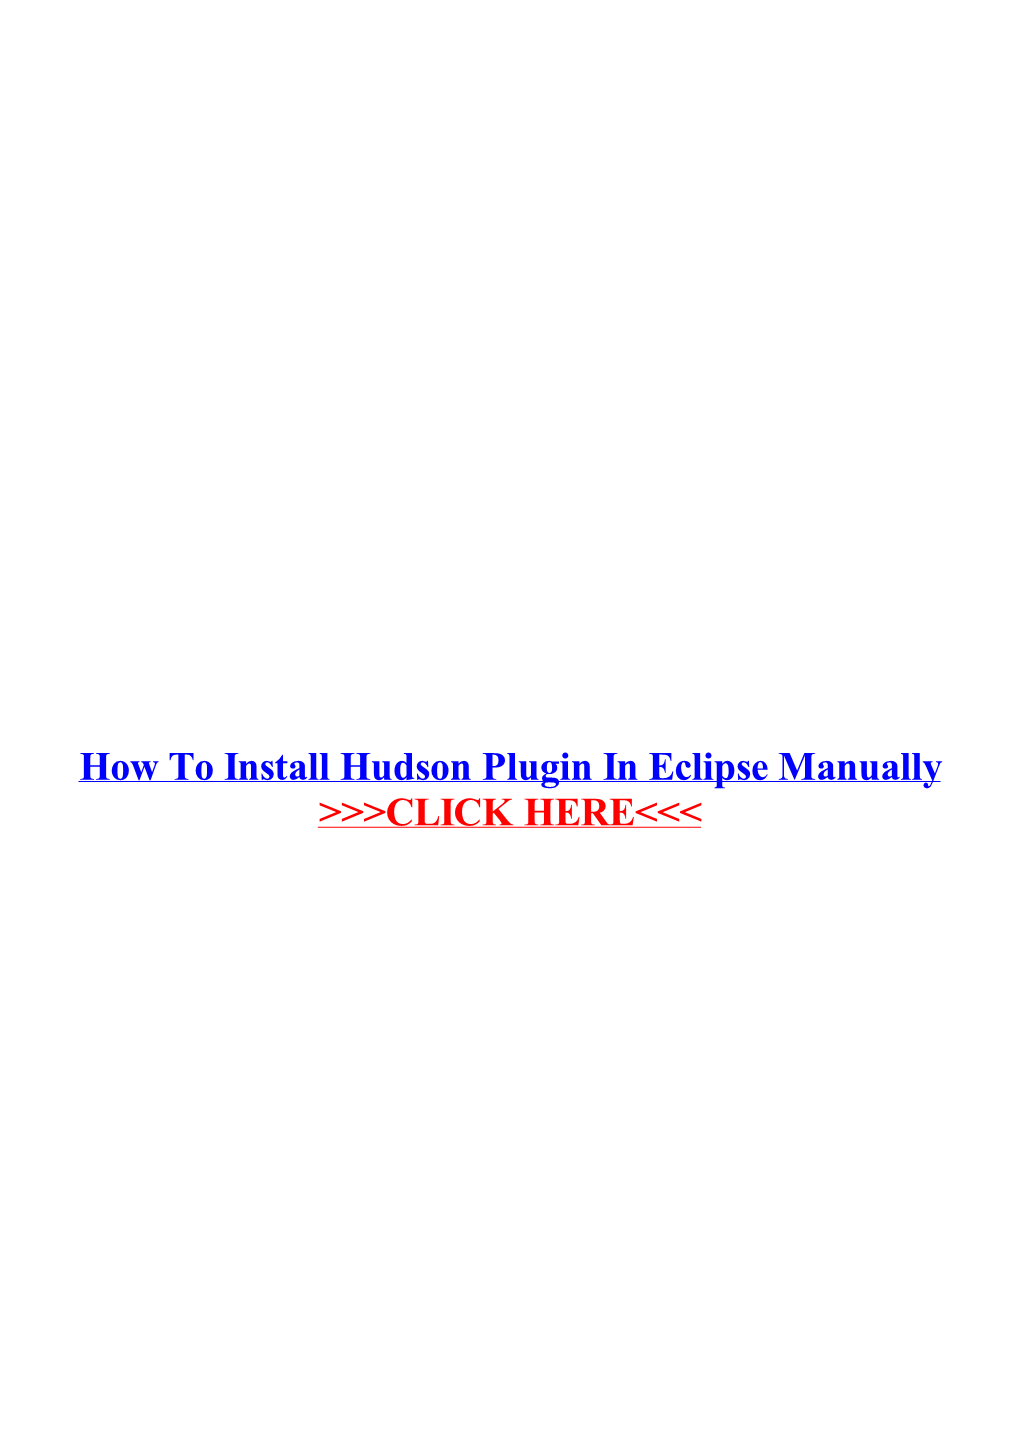 How to Install Hudson Plugin in Eclipse Manually